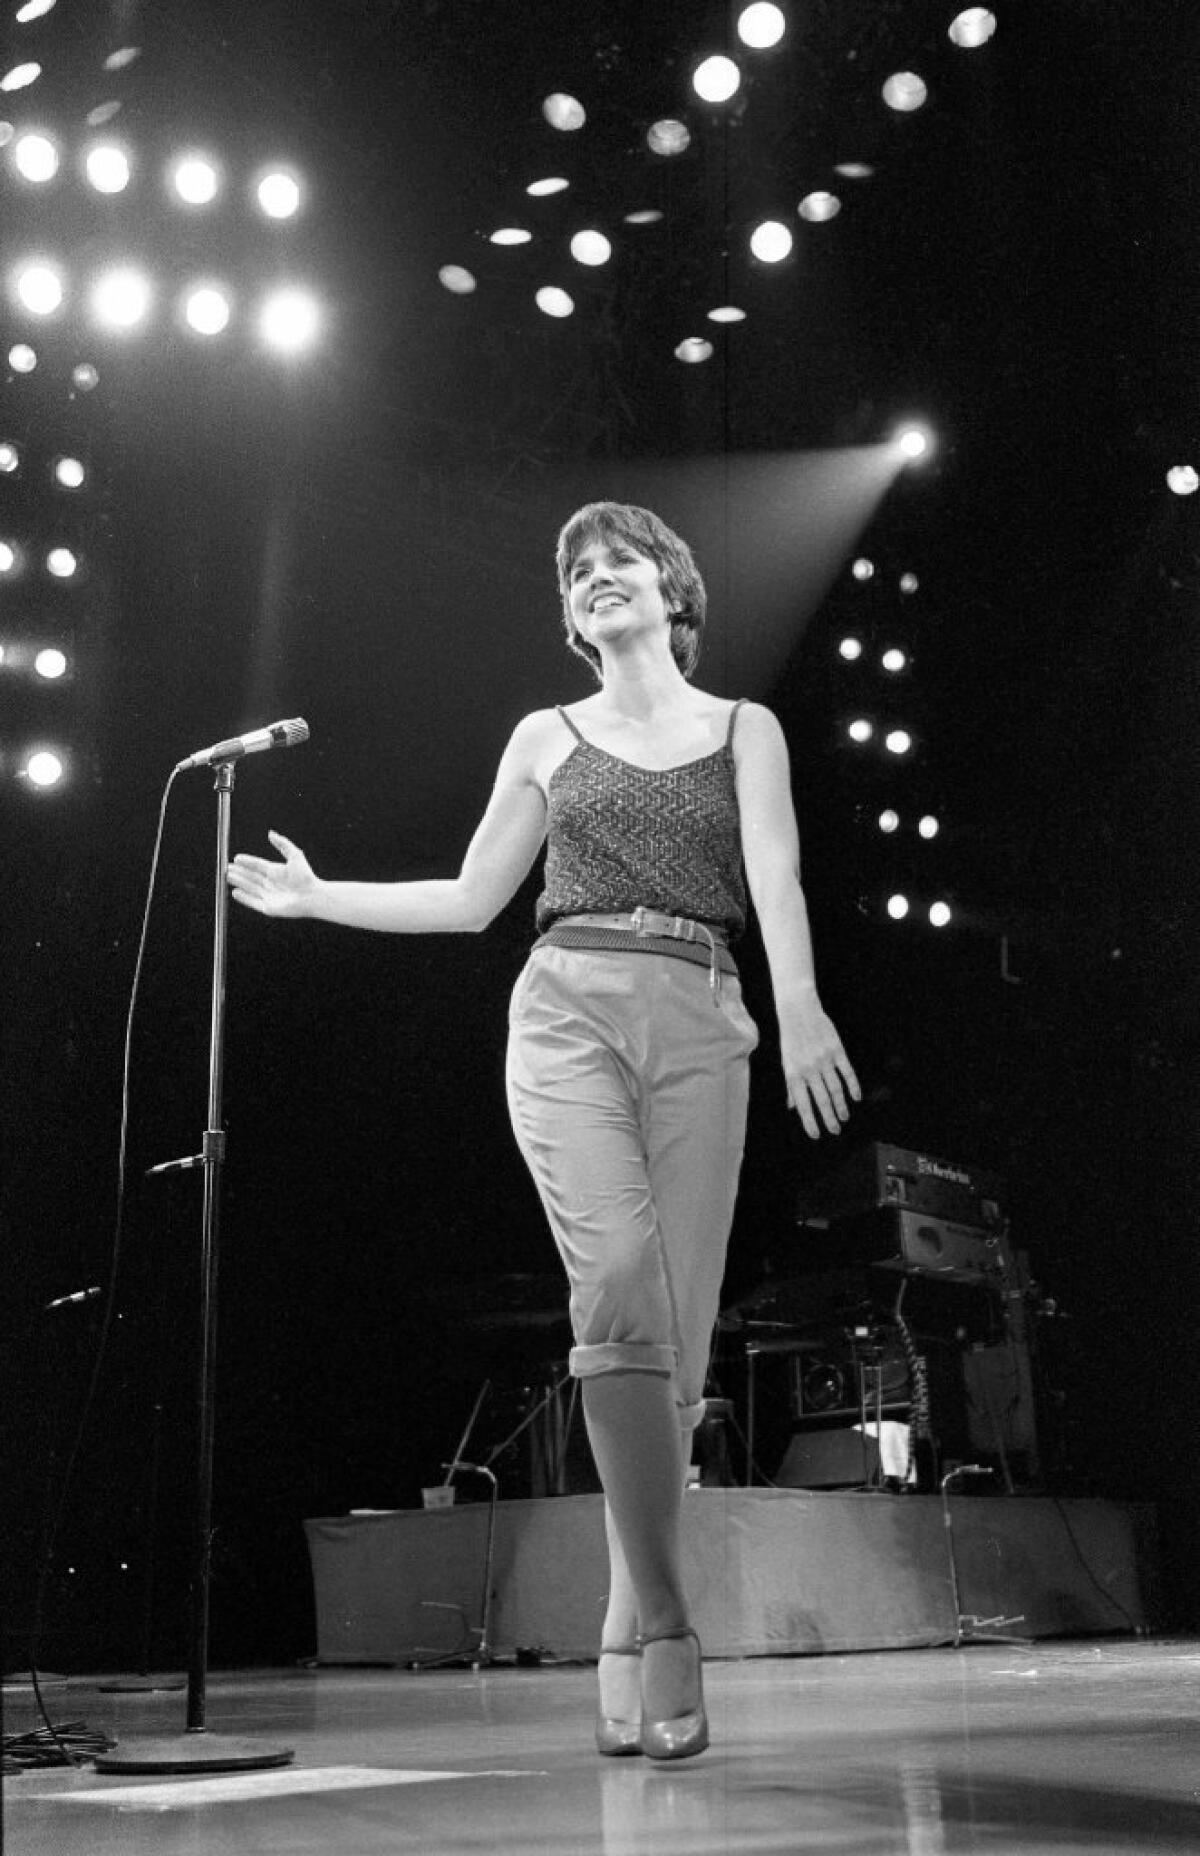 Linda Ronstadt, whose backing band was the hub for the Eagles